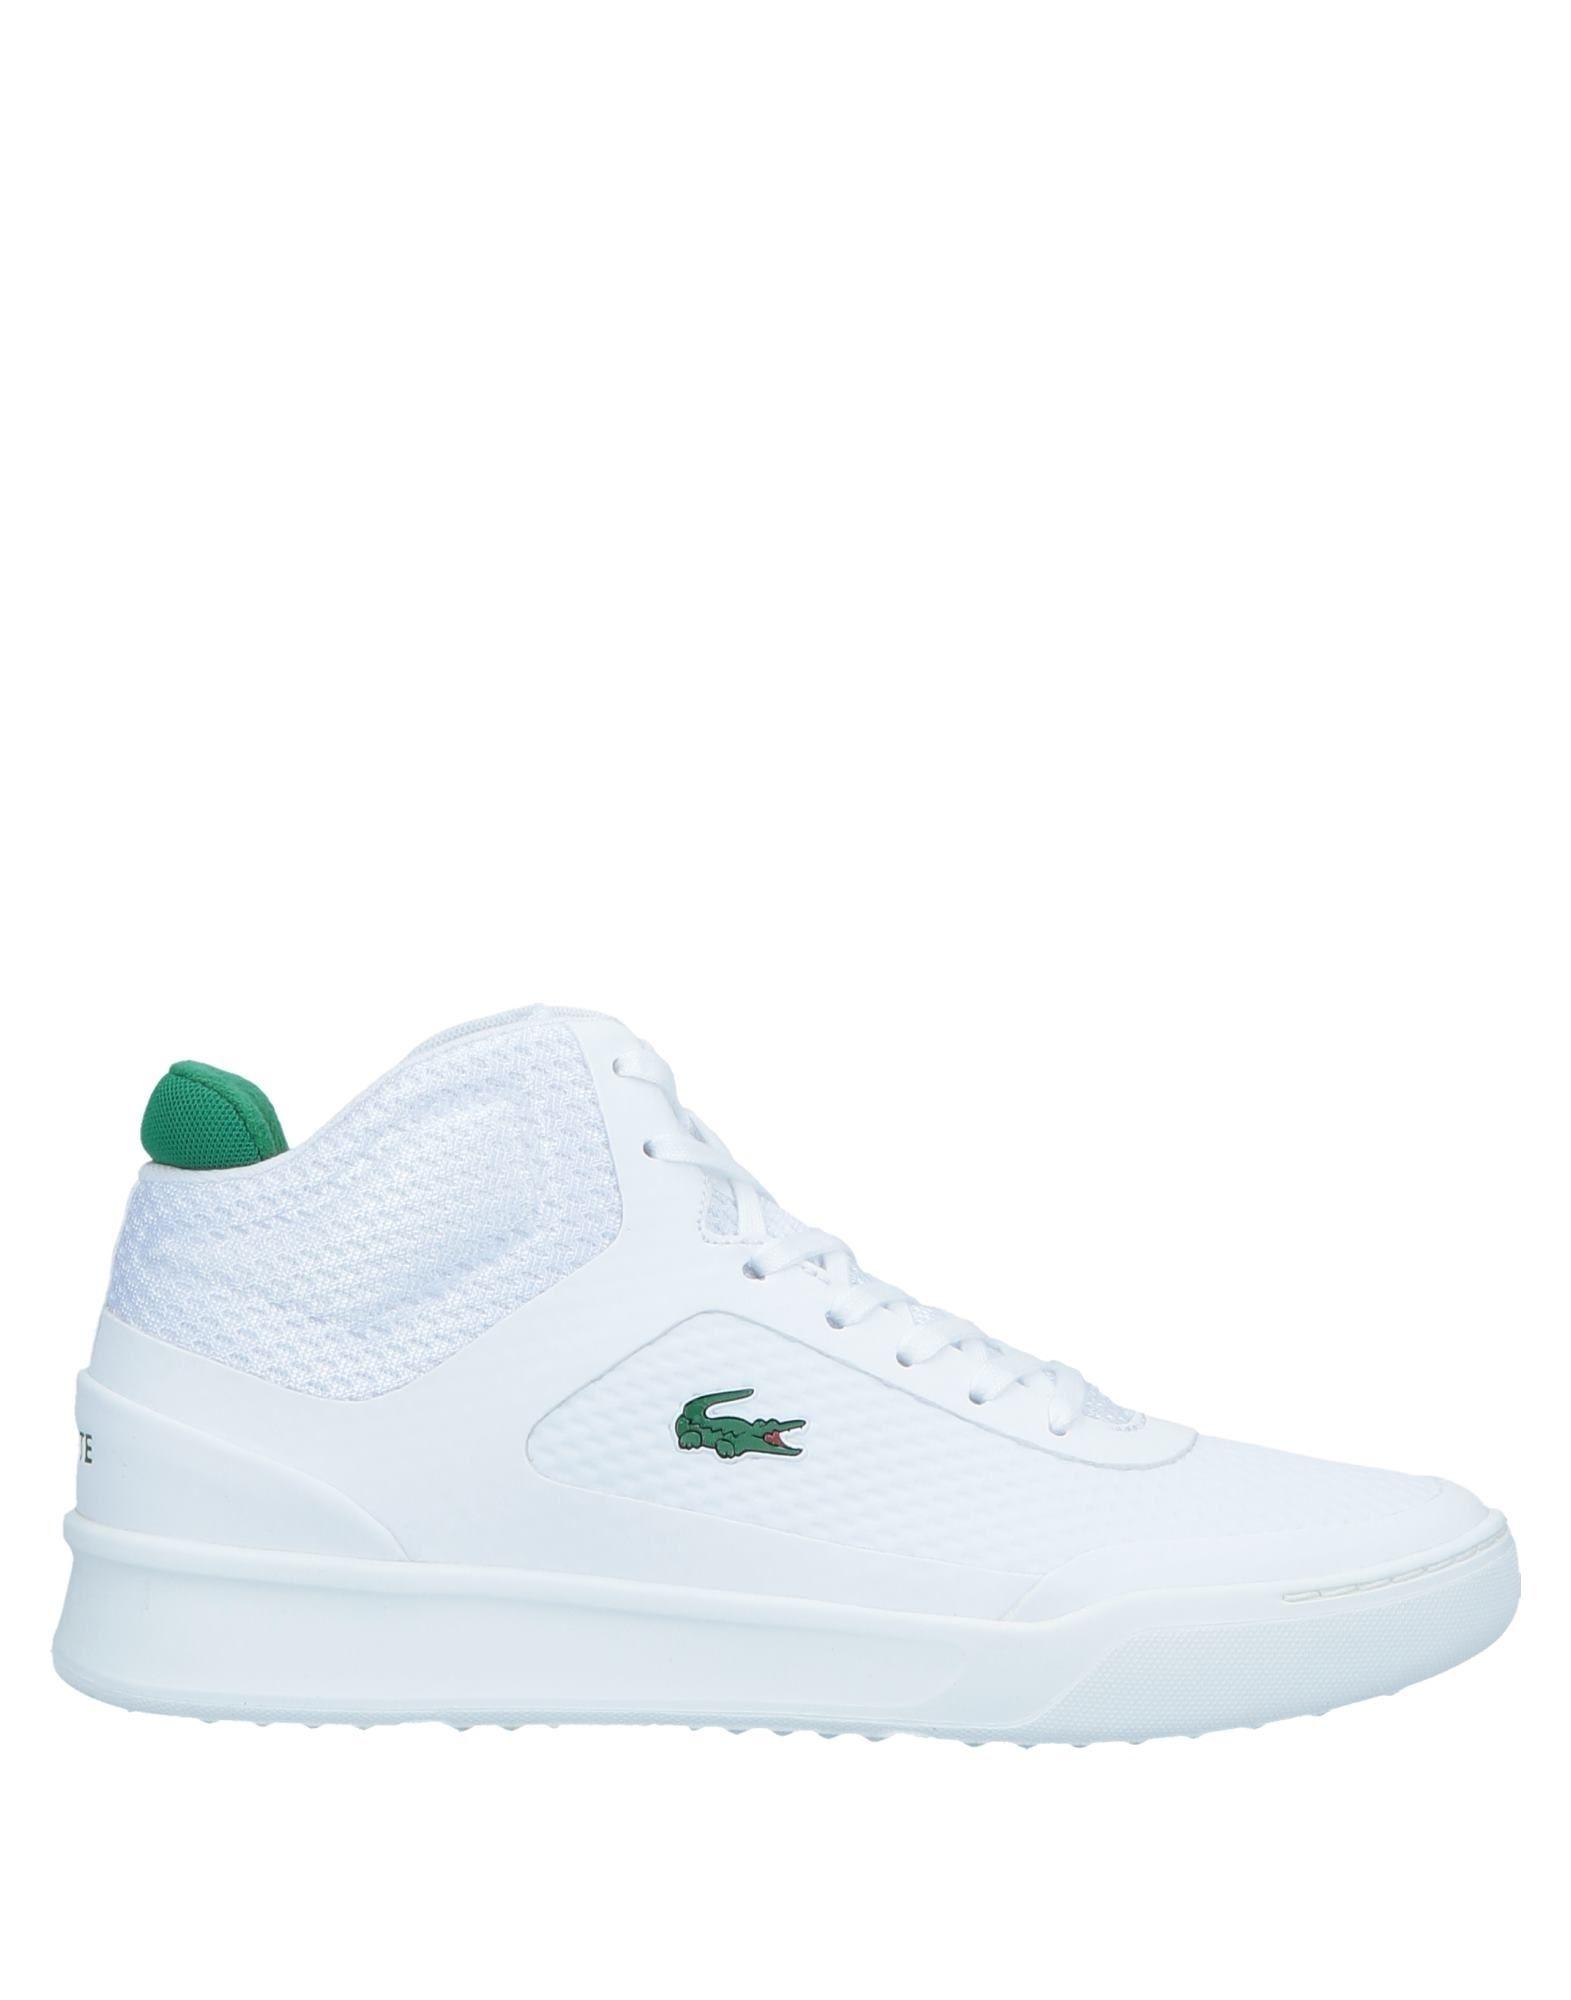 Lacoste Rubber High-tops & Sneakers in White for Men - Lyst